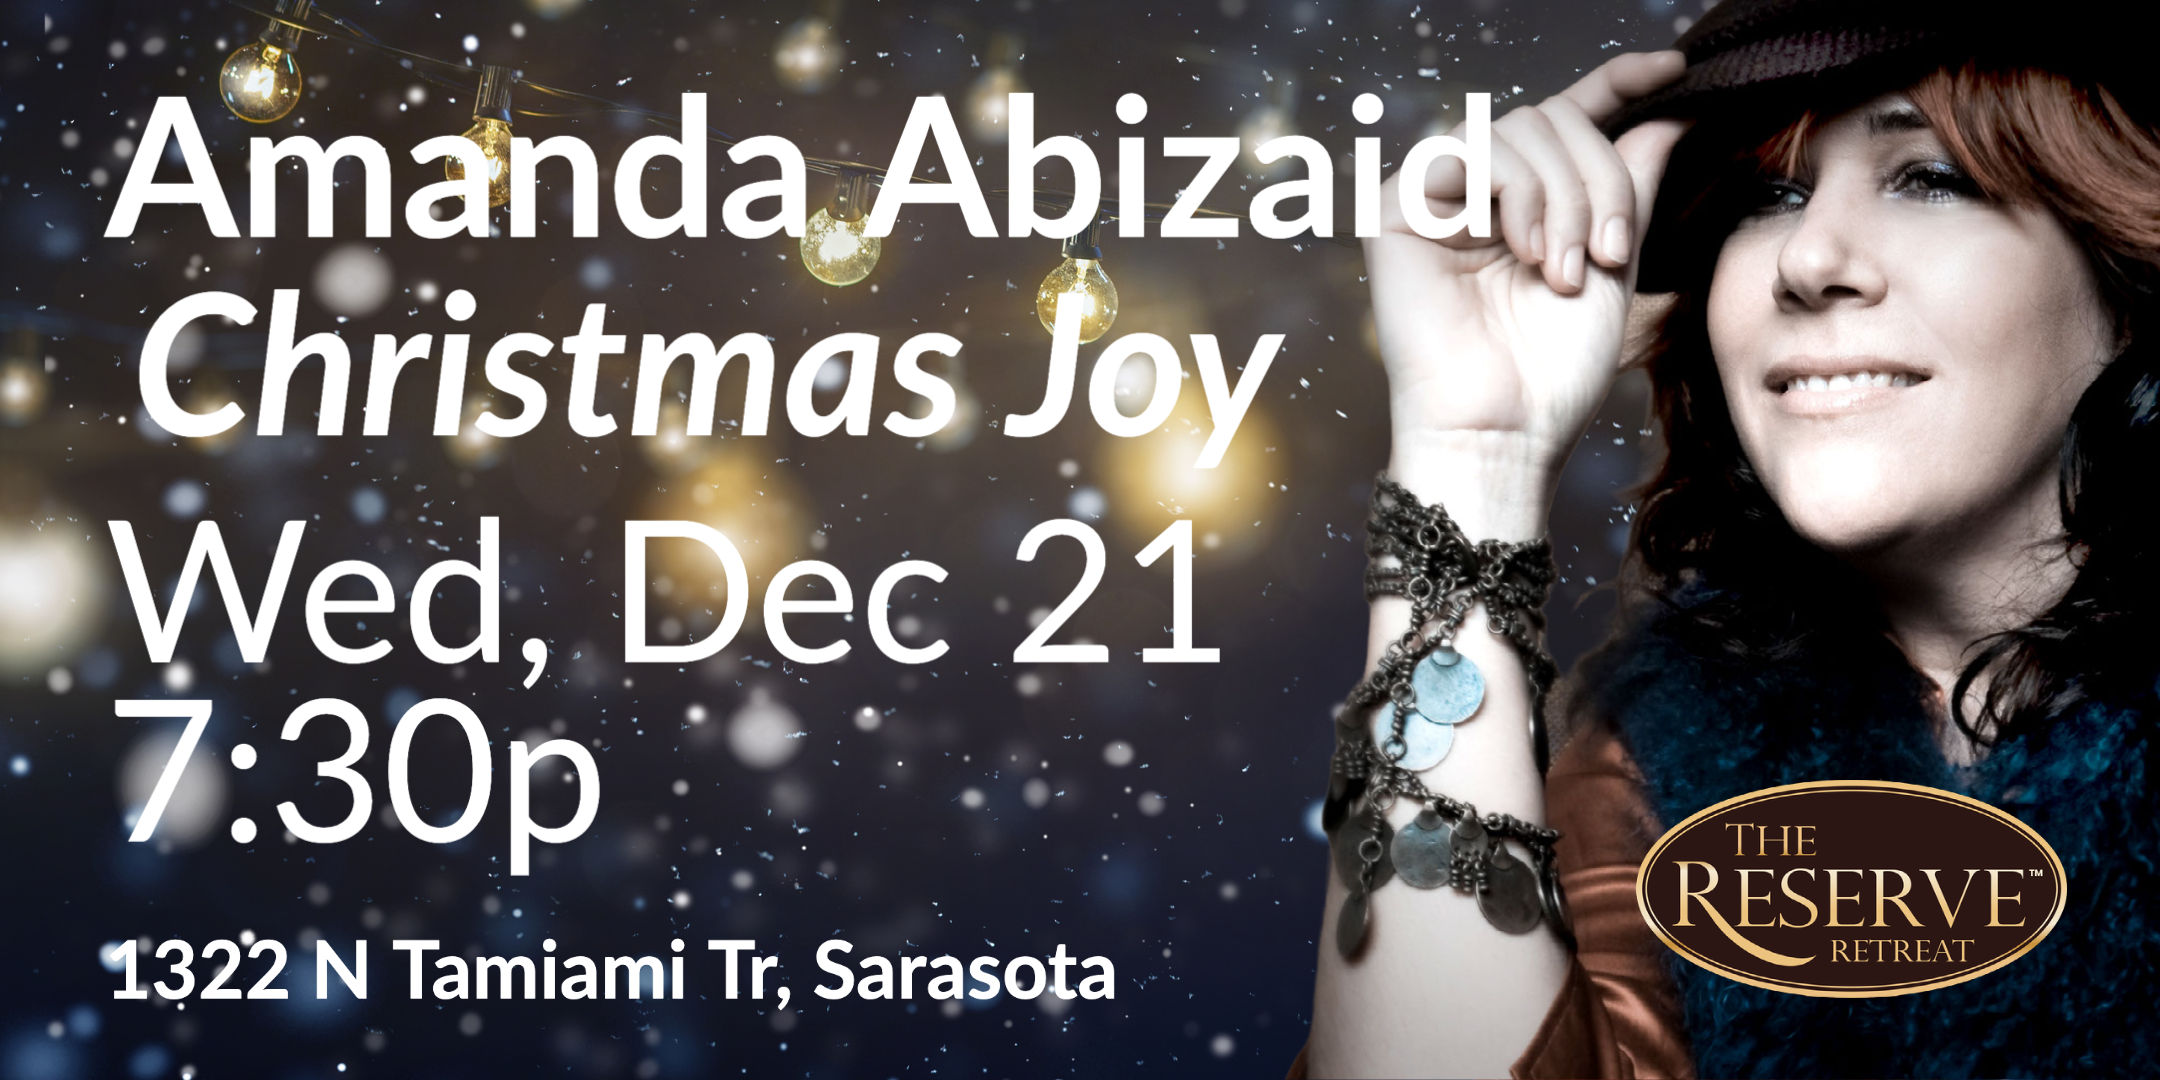 Singer-songwriter Amanda Abizaid shares songs from her new Christmas album at The Reserve Retreat